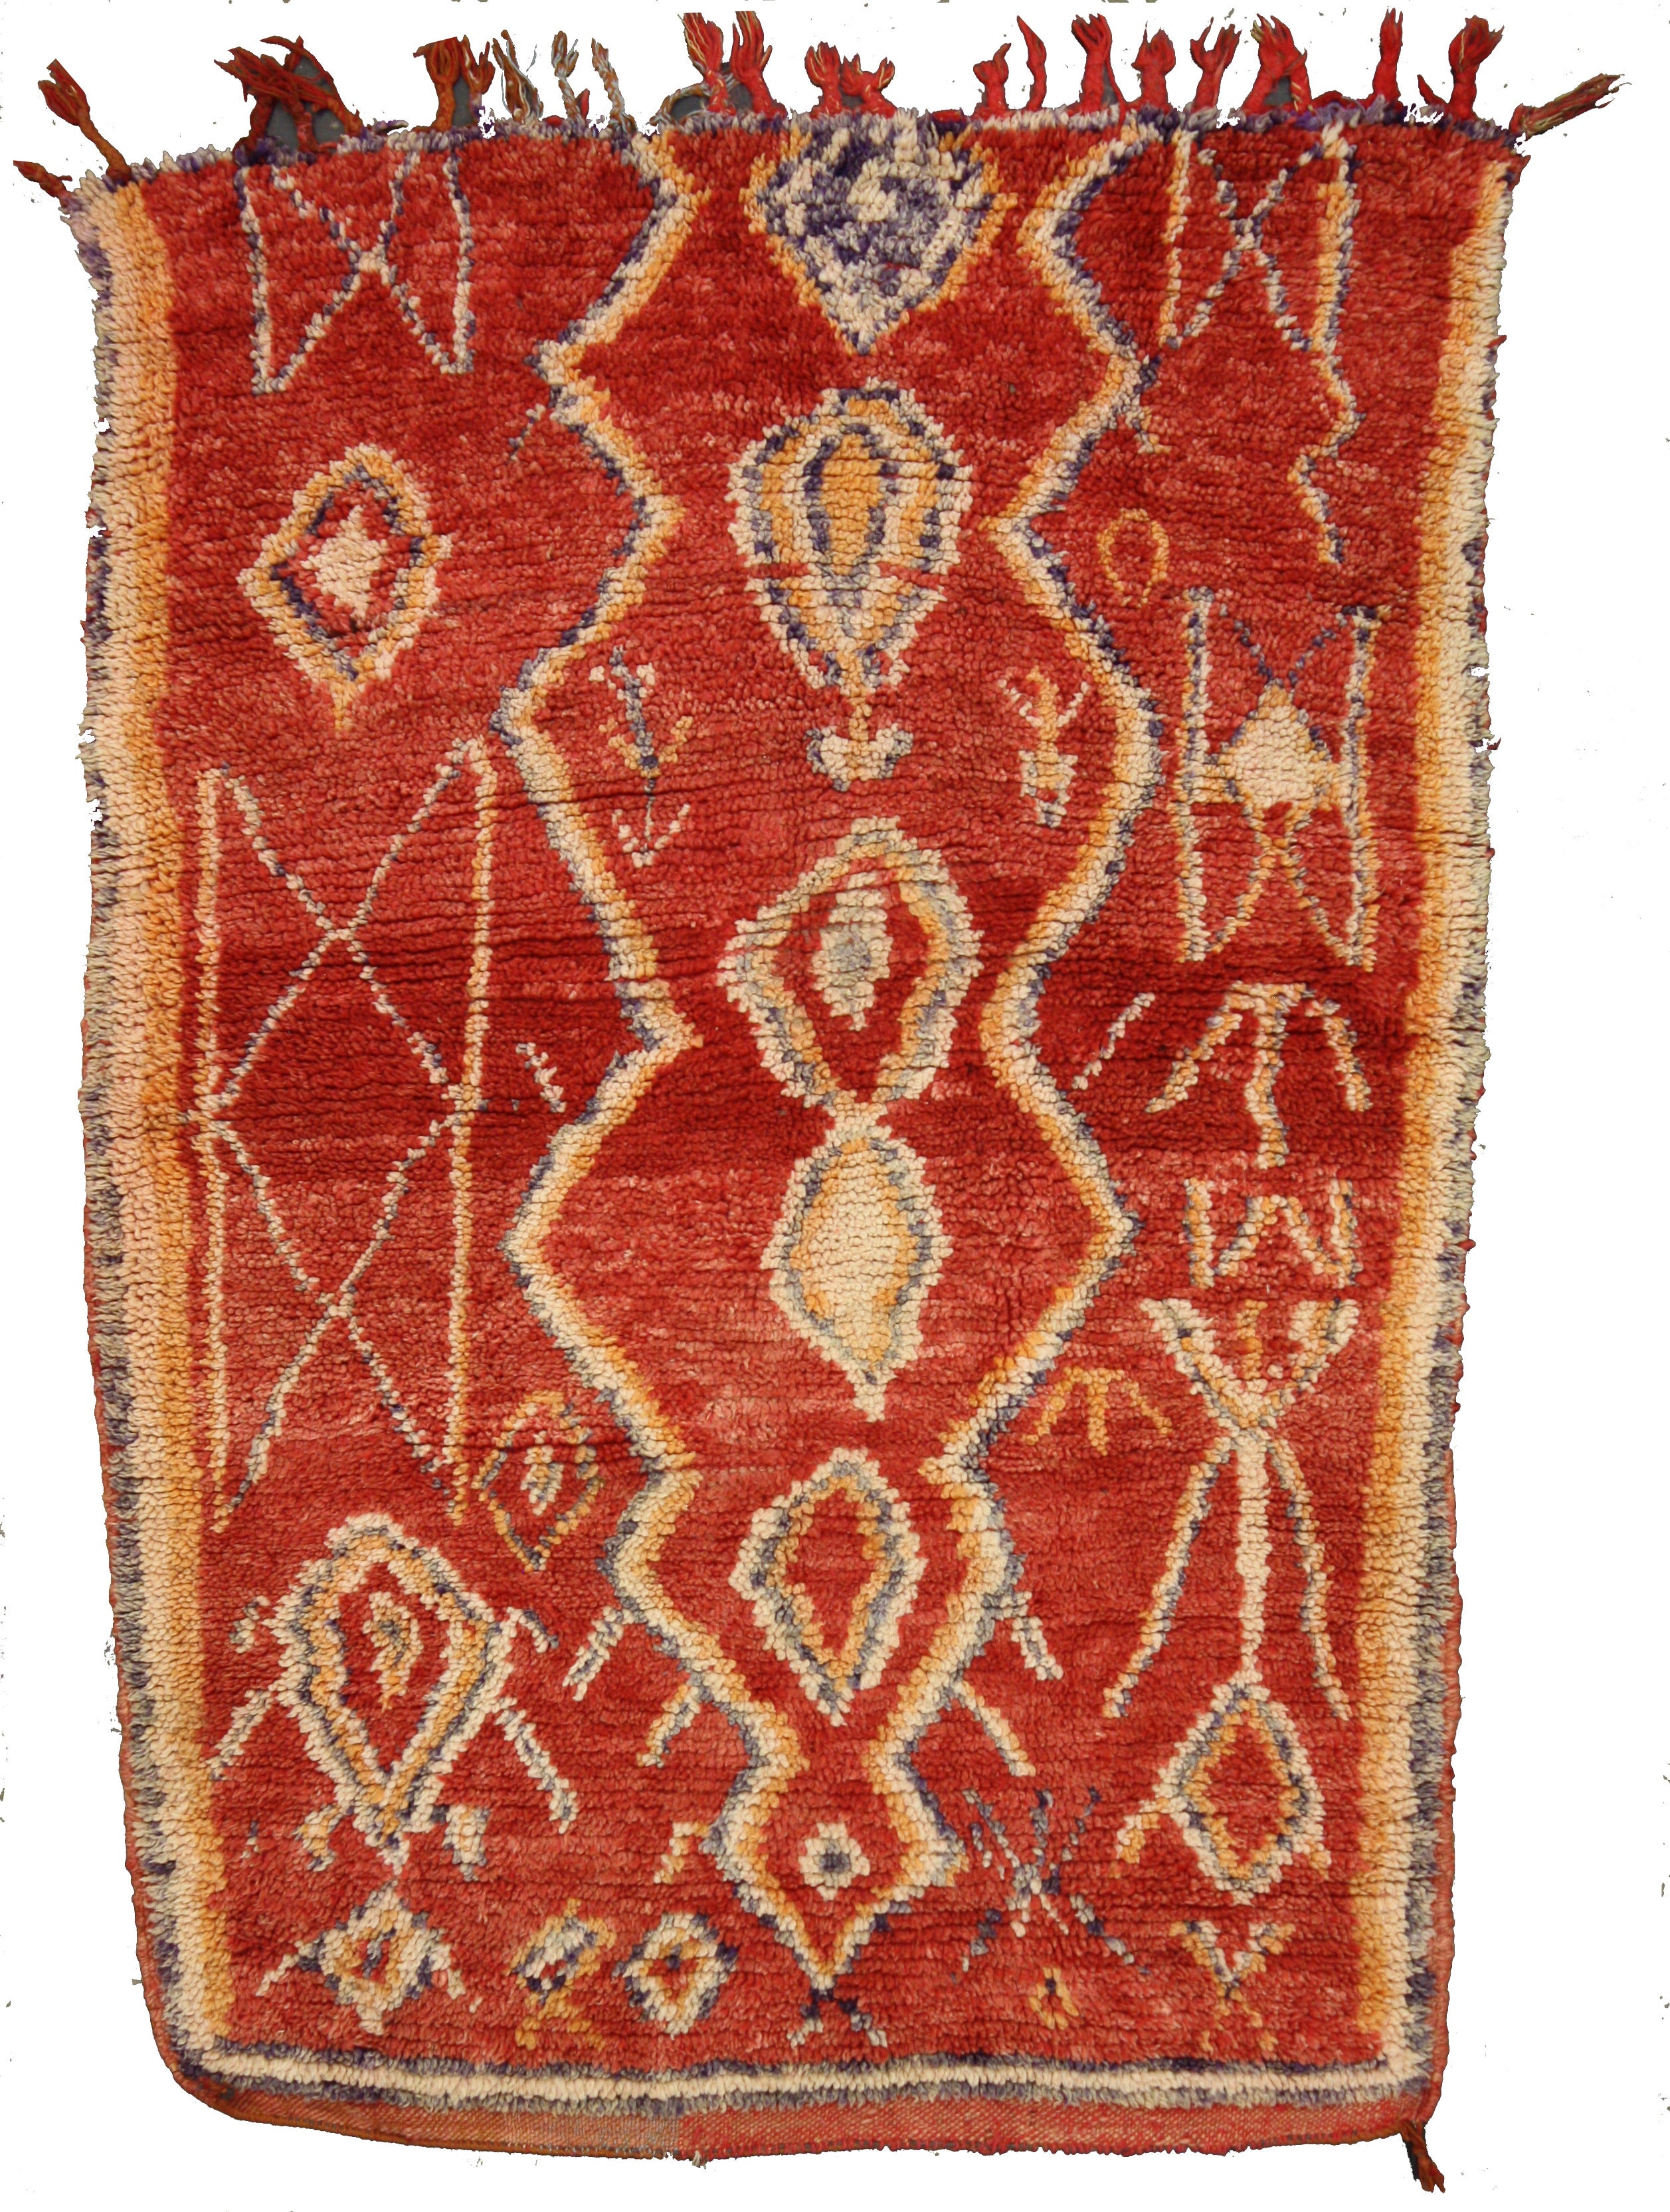 Red Vintage Berber Moroccan Azilal Rug, 03'08" x 05'02"